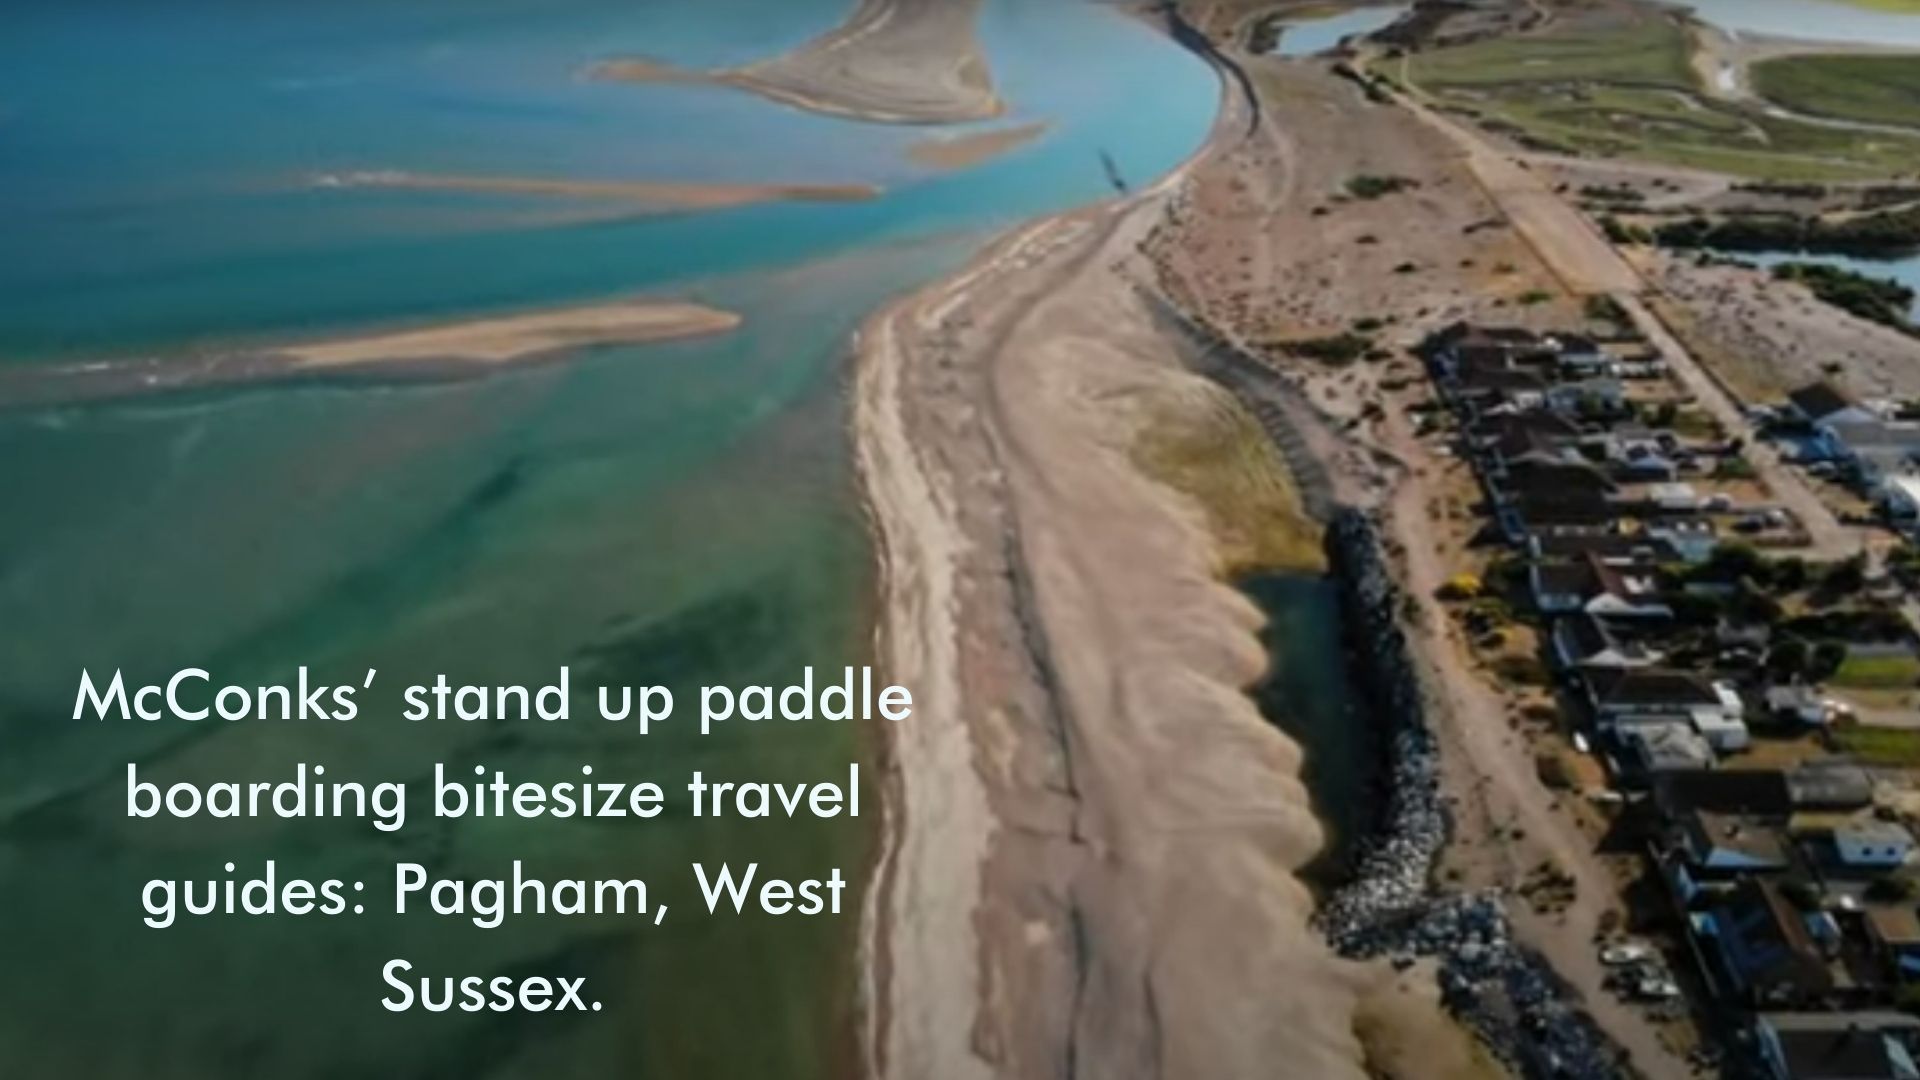 You are currently viewing McConks’ stand up paddle boarding bitesize travel guides: Pagham, West Sussex.